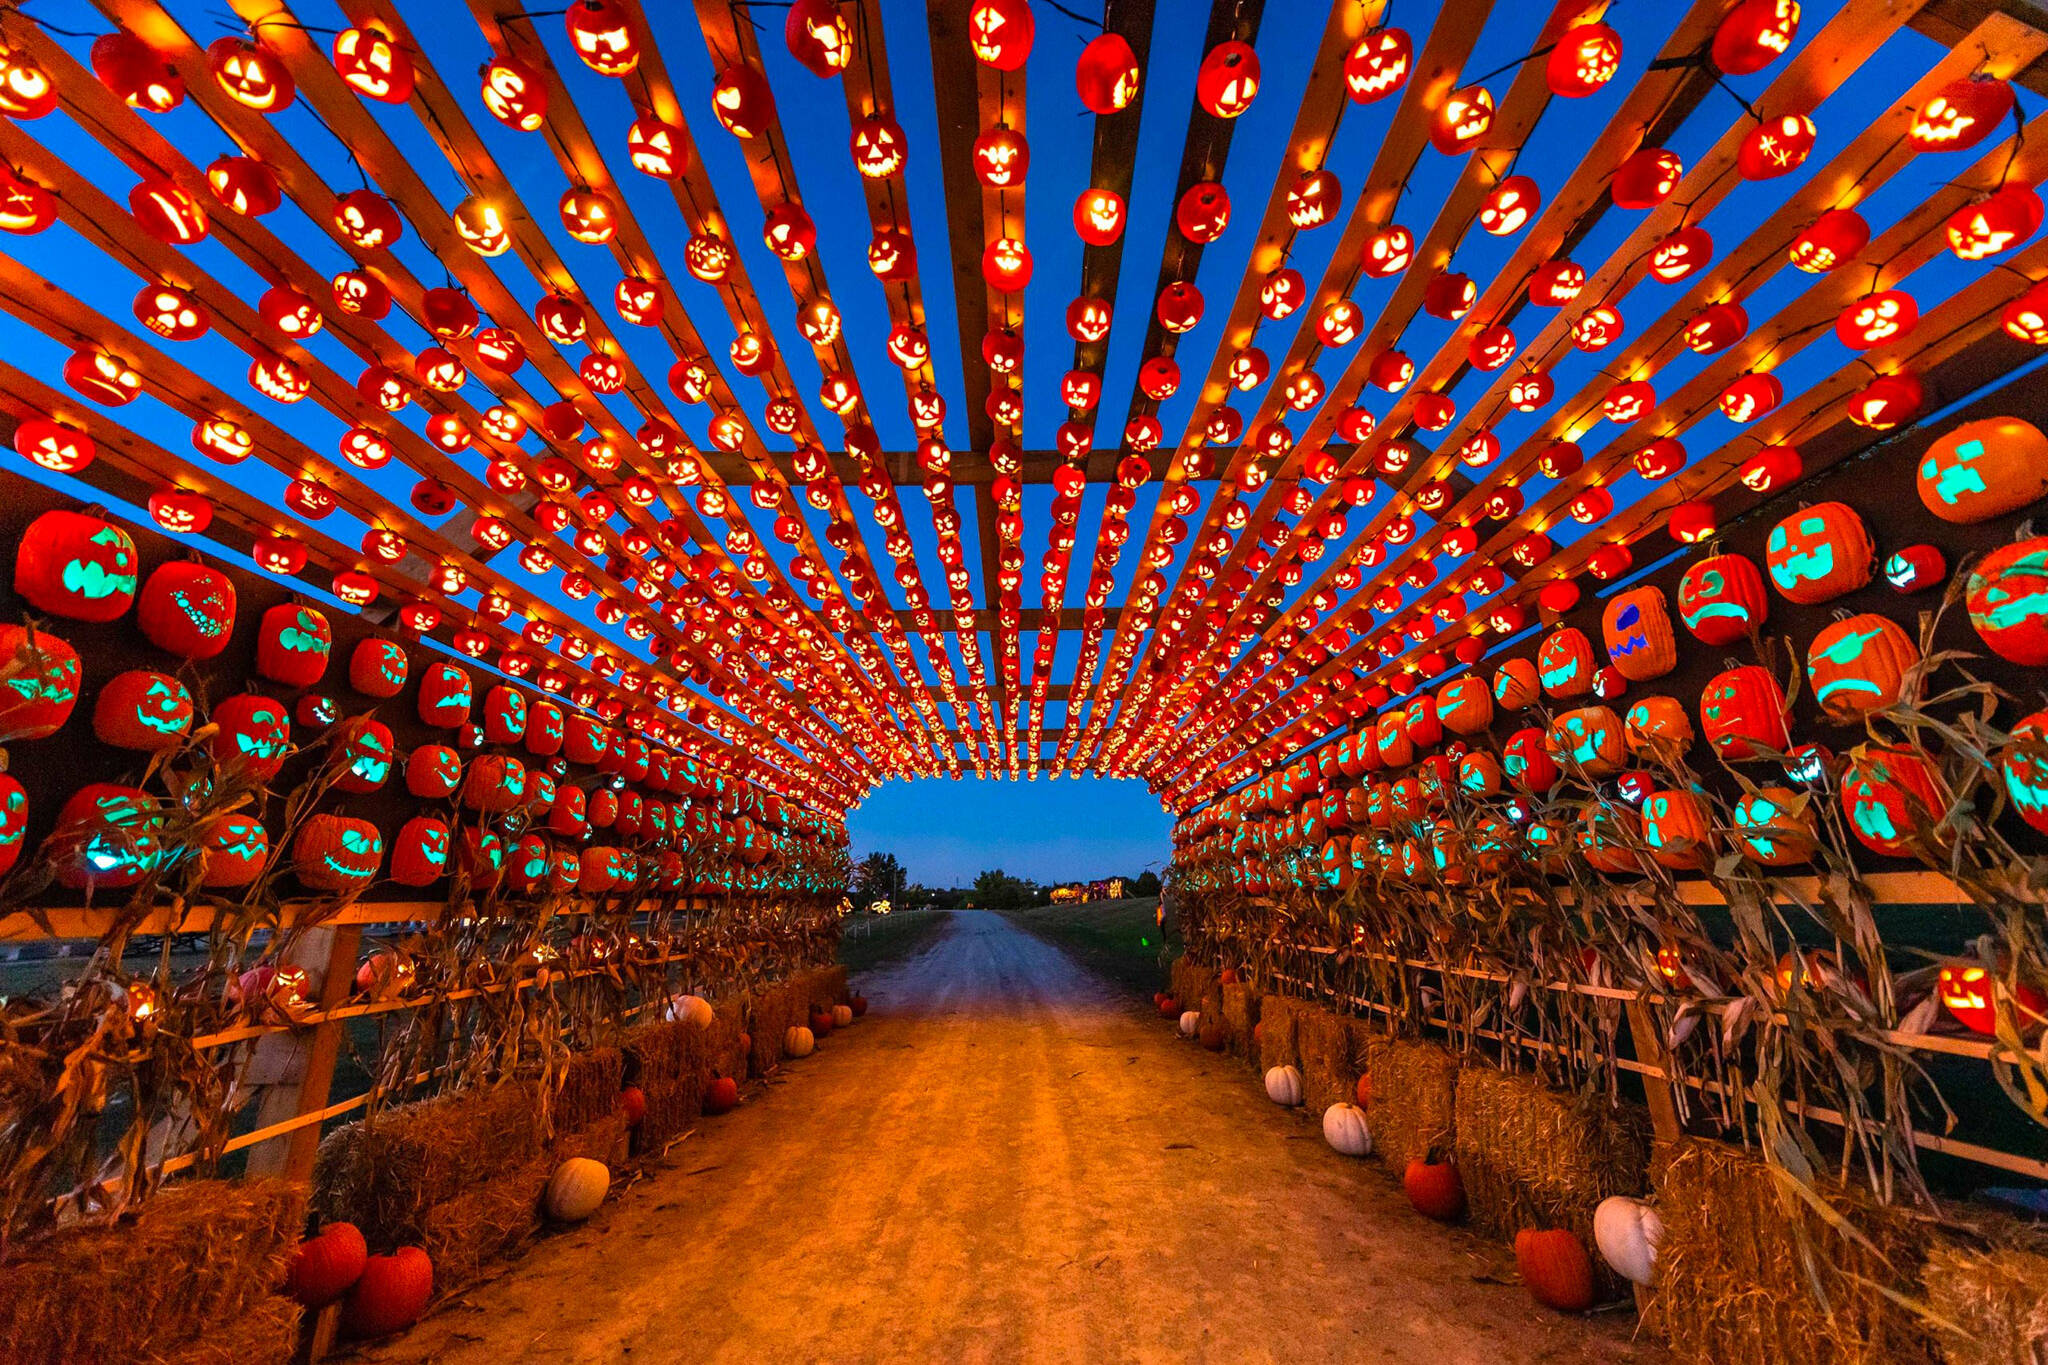 A festival with thousands of glowing pumpkins is coming to Ontario this